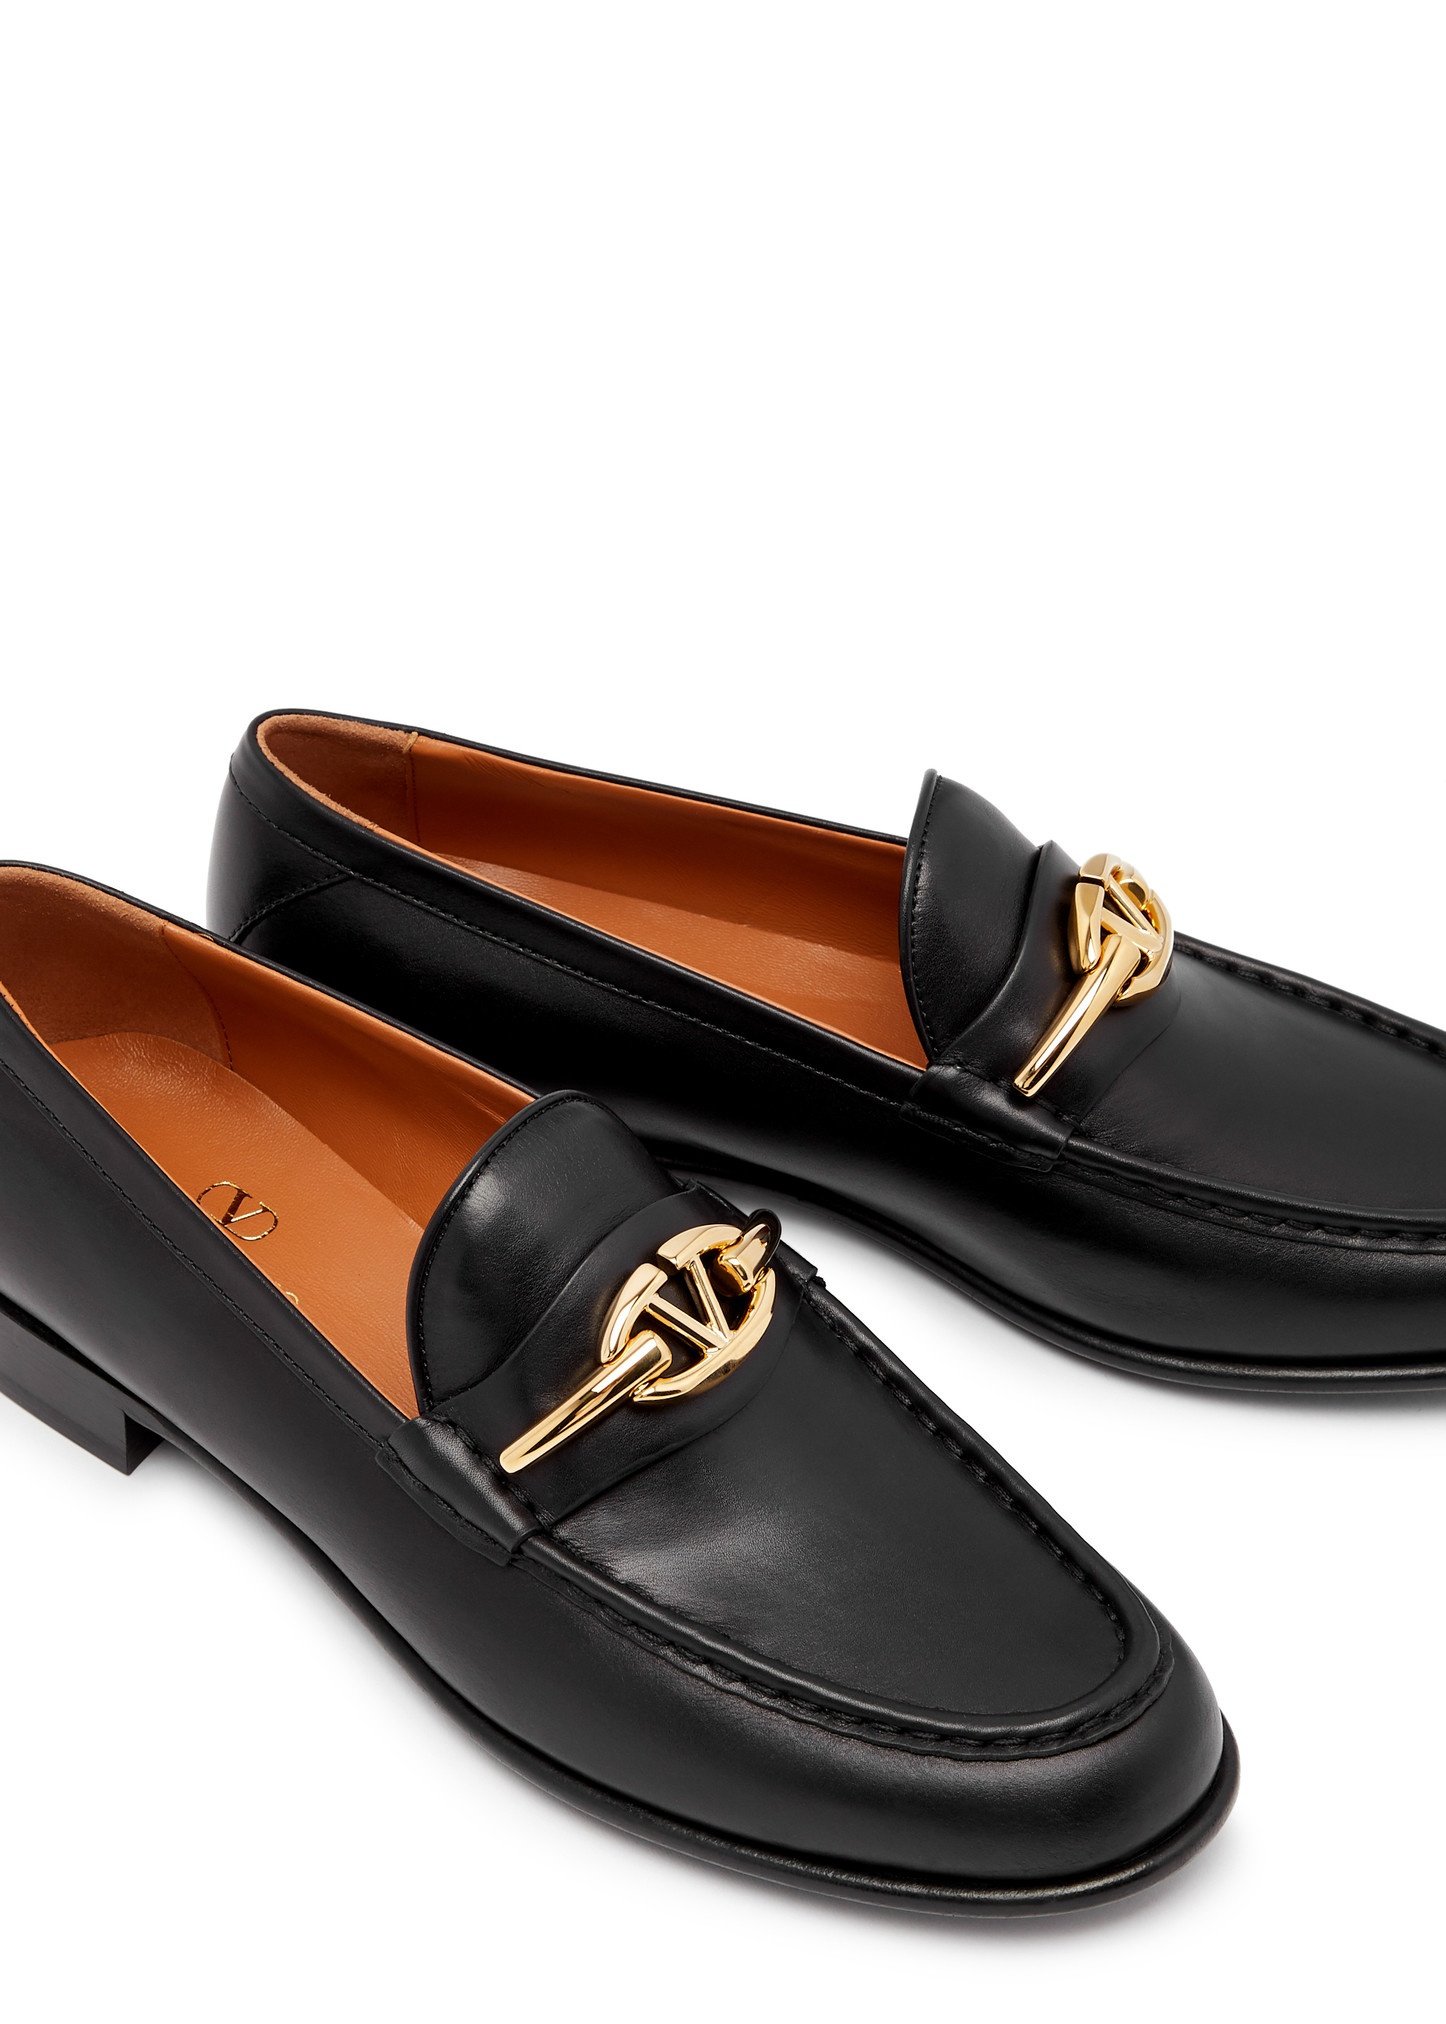 VLogo leather loafers - 3